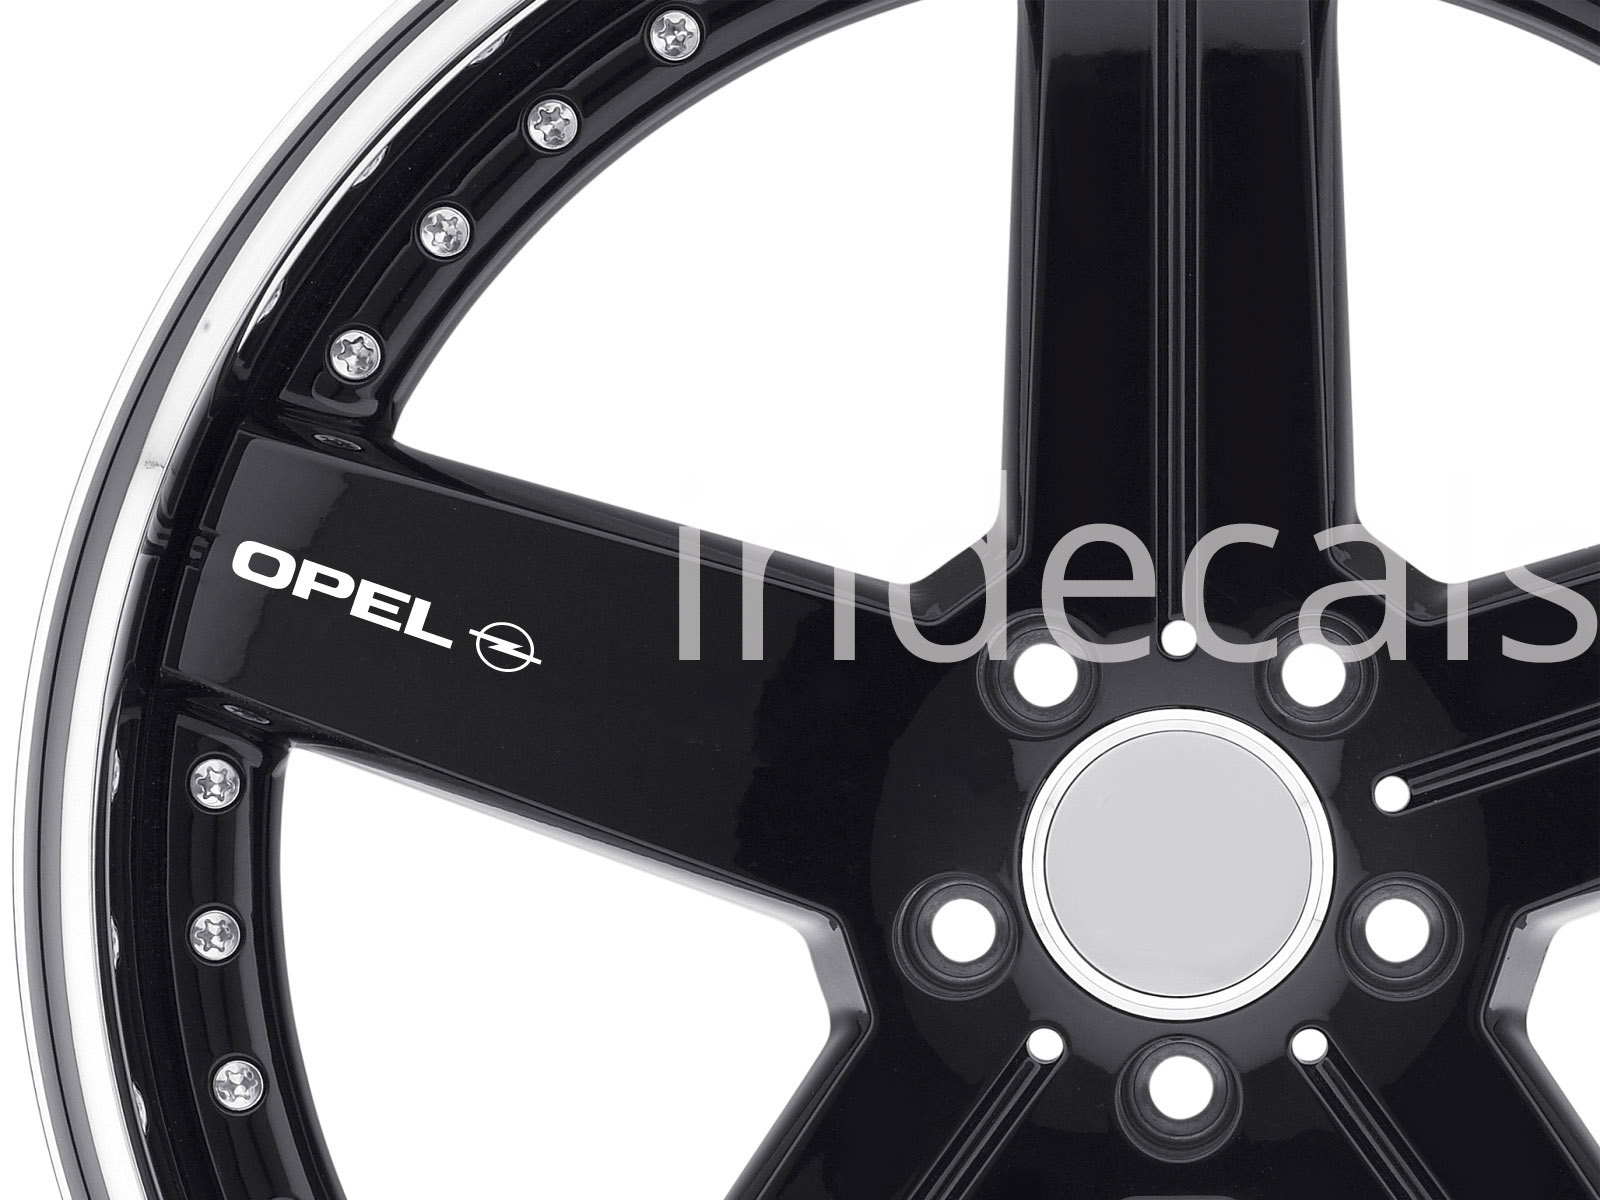 6 x Opel Stickers for Wheels - White